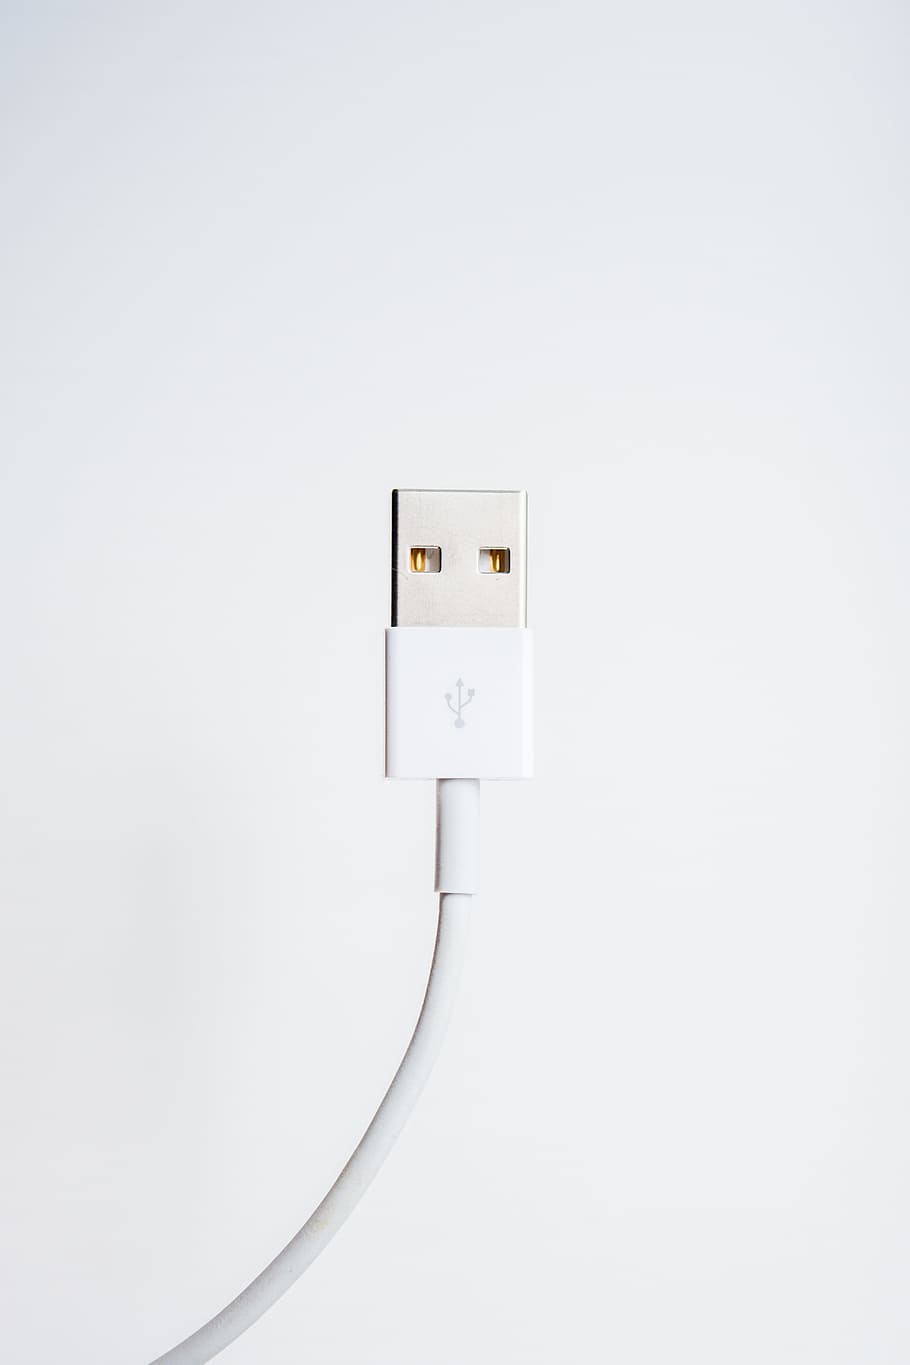 usb, cord, white, wall, electricity, cable, technology, connection, indoors, copy space